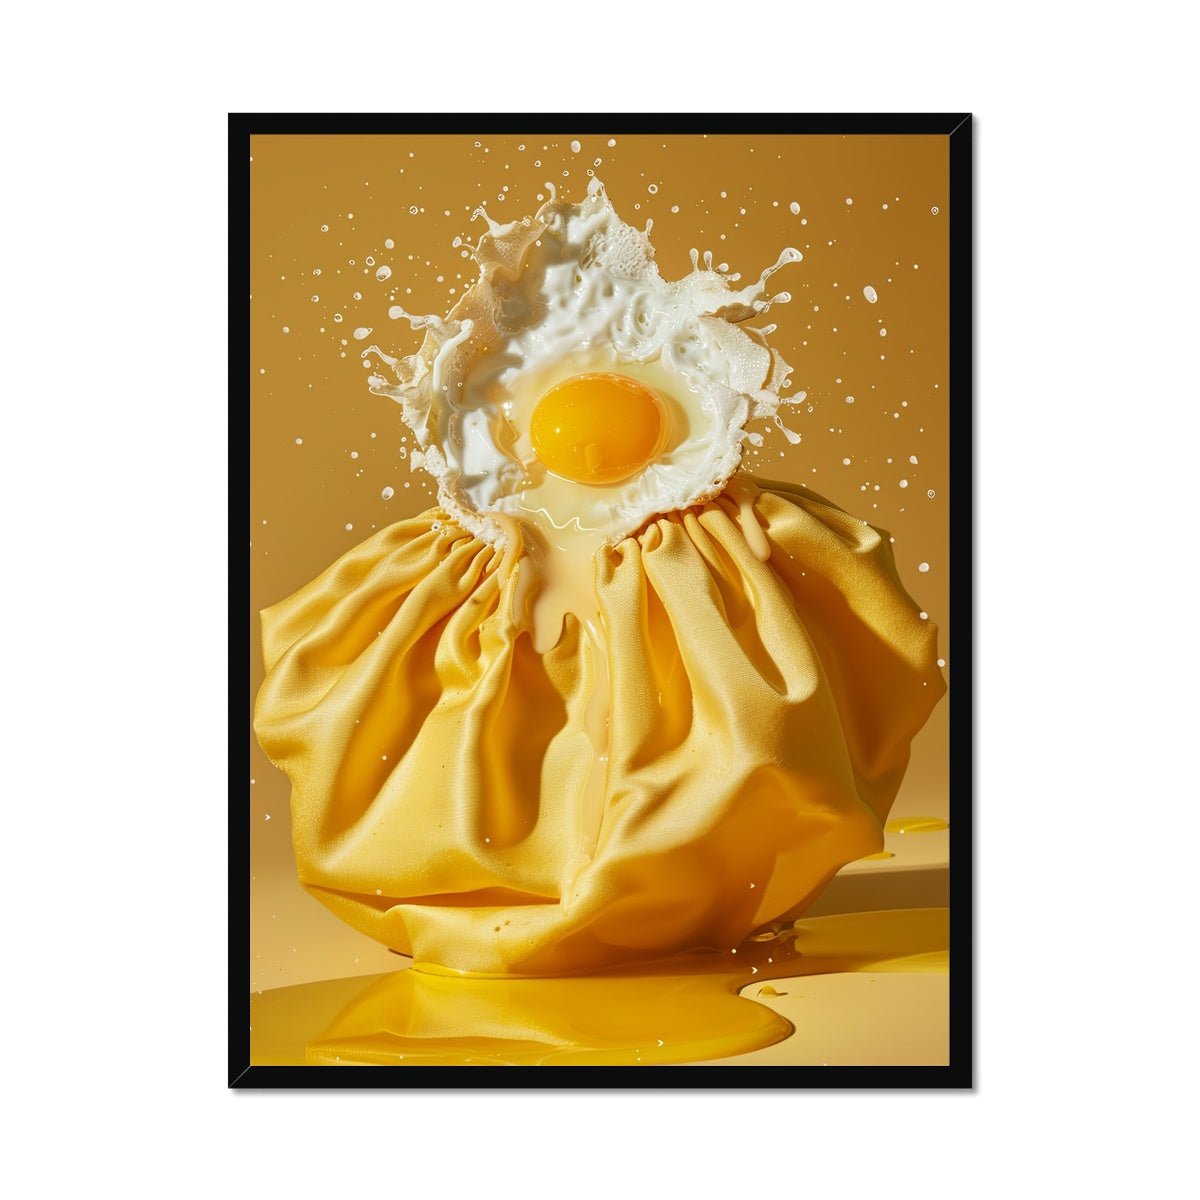 Egglicious Framed Print - Pixel Gallery